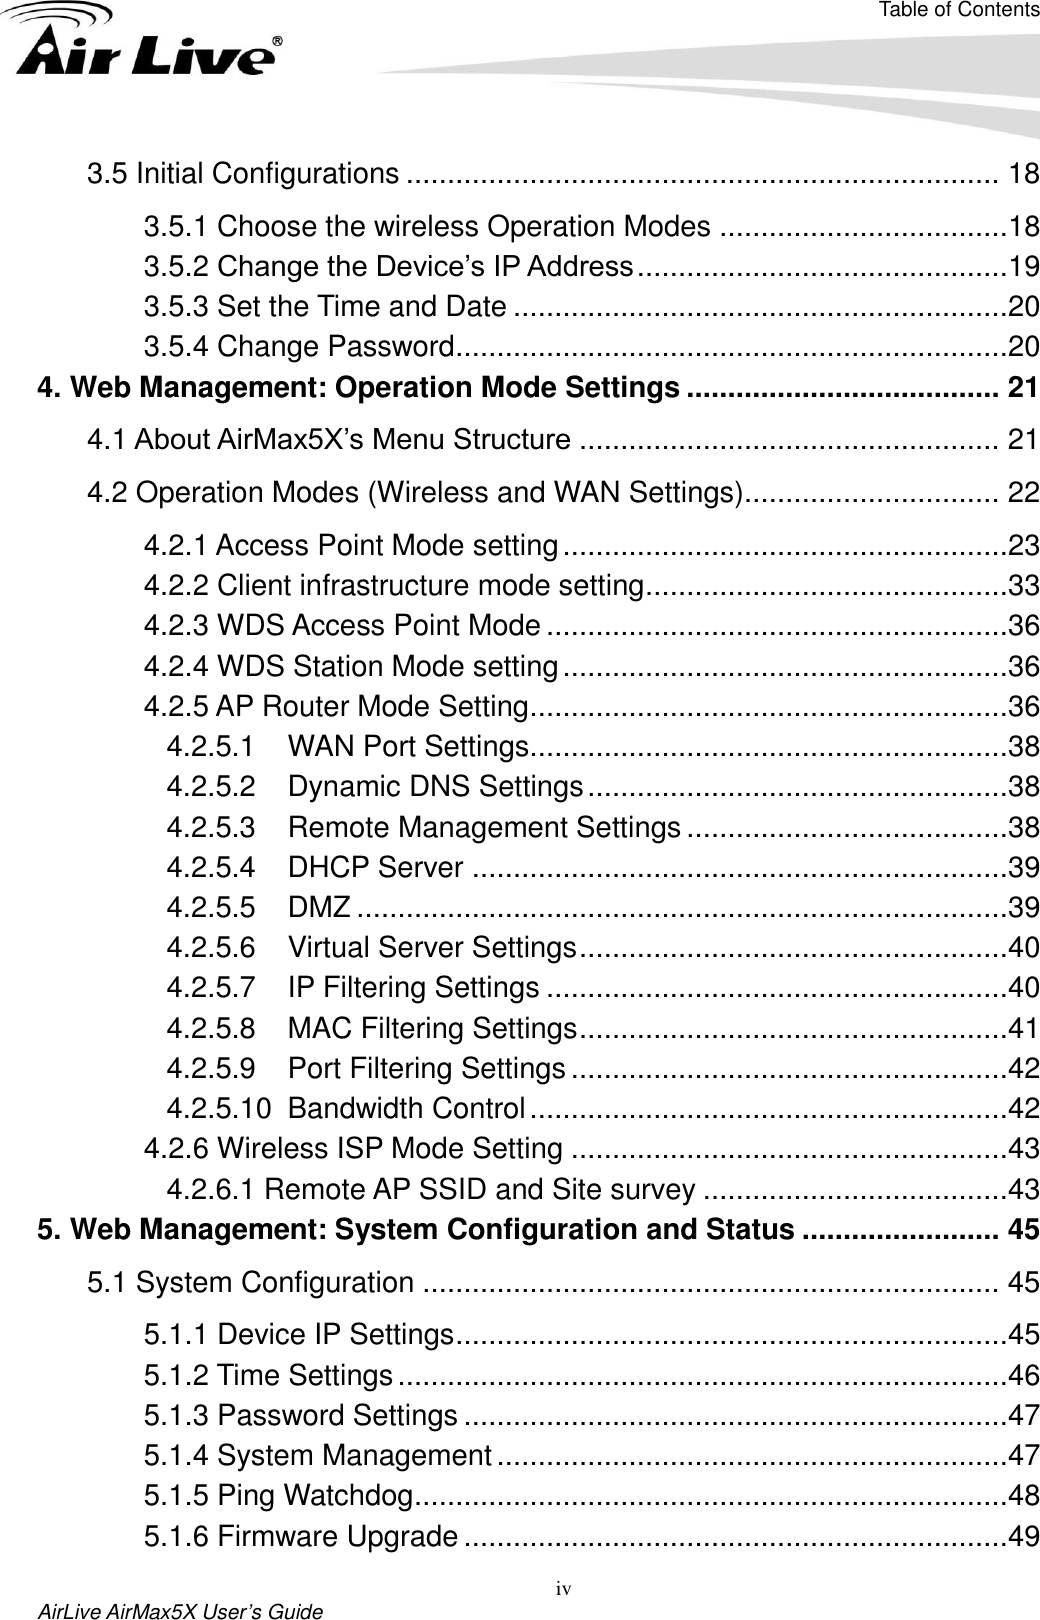 Table of Contents iv AirLive AirMax5X User’s Guide 3.5 Initial Configurations ........................................................................ 18 3.5.1 Choose the wireless Operation Modes ...................................18 3.5.2 Change the Device’s IP Address .............................................19 3.5.3 Set the Time and Date ............................................................20 3.5.4 Change Password ...................................................................20 4. Web Management: Operation Mode Settings ...................................... 21 4.1 About AirMax5X’s Menu Structure ................................................... 21 4.2 Operation Modes (Wireless and WAN Settings)............................... 22 4.2.1 Access Point Mode setting ......................................................23 4.2.2 Client infrastructure mode setting ............................................33 4.2.3 WDS Access Point Mode ........................................................36 4.2.4 WDS Station Mode setting ......................................................36 4.2.5 AP Router Mode Setting ..........................................................36 4.2.5.1  WAN Port Settings..........................................................38 4.2.5.2  Dynamic DNS Settings ...................................................38 4.2.5.3  Remote Management Settings .......................................38 4.2.5.4  DHCP Server .................................................................39 4.2.5.5  DMZ ...............................................................................39 4.2.5.6  Virtual Server Settings ....................................................40 4.2.5.7  IP Filtering Settings ........................................................40 4.2.5.8  MAC Filtering Settings ....................................................41 4.2.5.9  Port Filtering Settings .....................................................42 4.2.5.10  Bandwidth Control ..........................................................42 4.2.6 Wireless ISP Mode Setting .....................................................43 4.2.6.1 Remote AP SSID and Site survey .....................................43 5. Web Management: System Configuration and Status ........................ 45 5.1 System Configuration ...................................................................... 45 5.1.1 Device IP Settings ...................................................................45 5.1.2 Time Settings ..........................................................................46 5.1.3 Password Settings ..................................................................47 5.1.4 System Management ..............................................................47 5.1.5 Ping Watchdog ........................................................................48 5.1.6 Firmware Upgrade ..................................................................49 